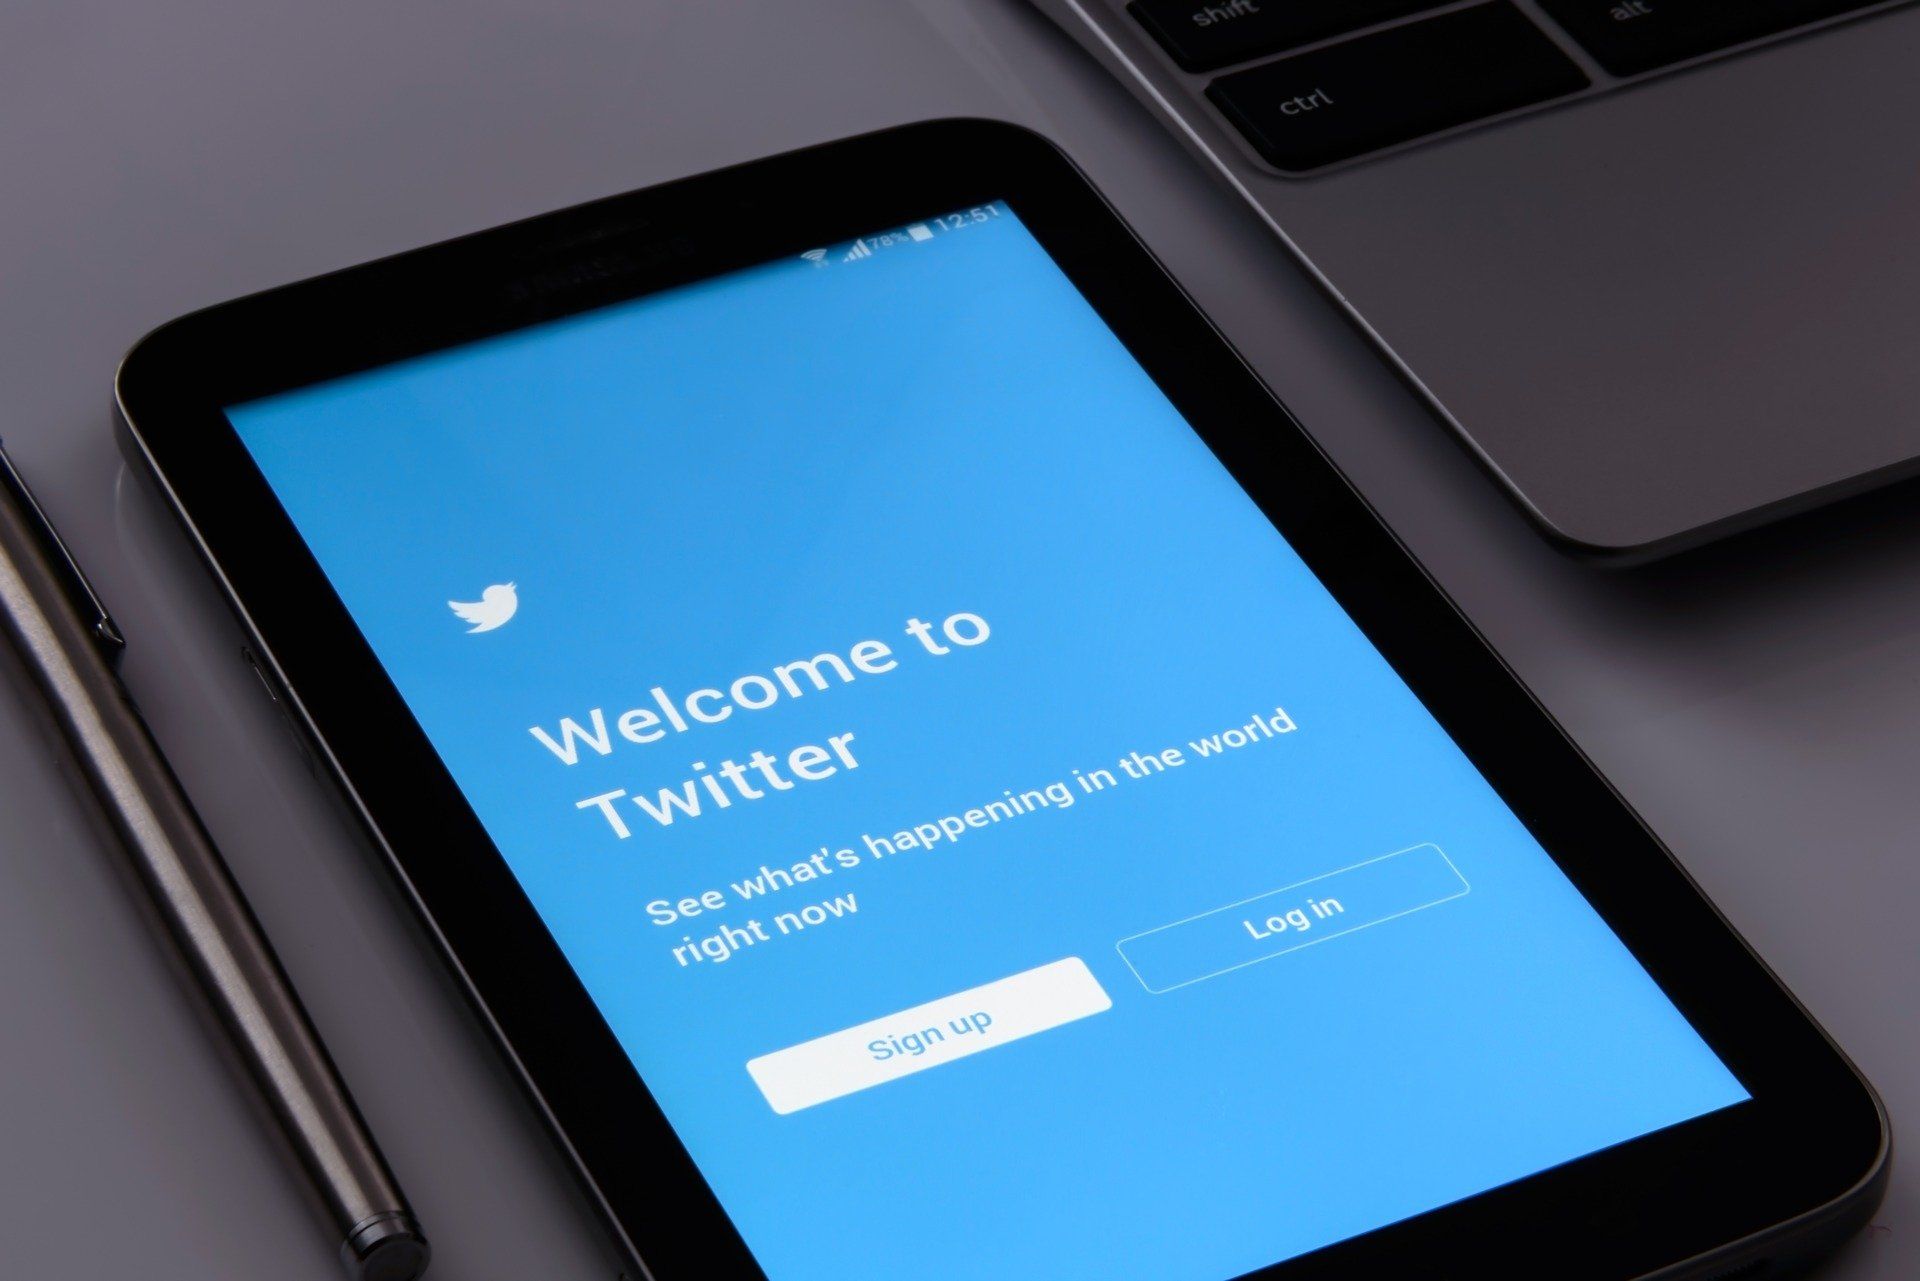 Nigeria will lift ban on Twitter only if certain conditions are met